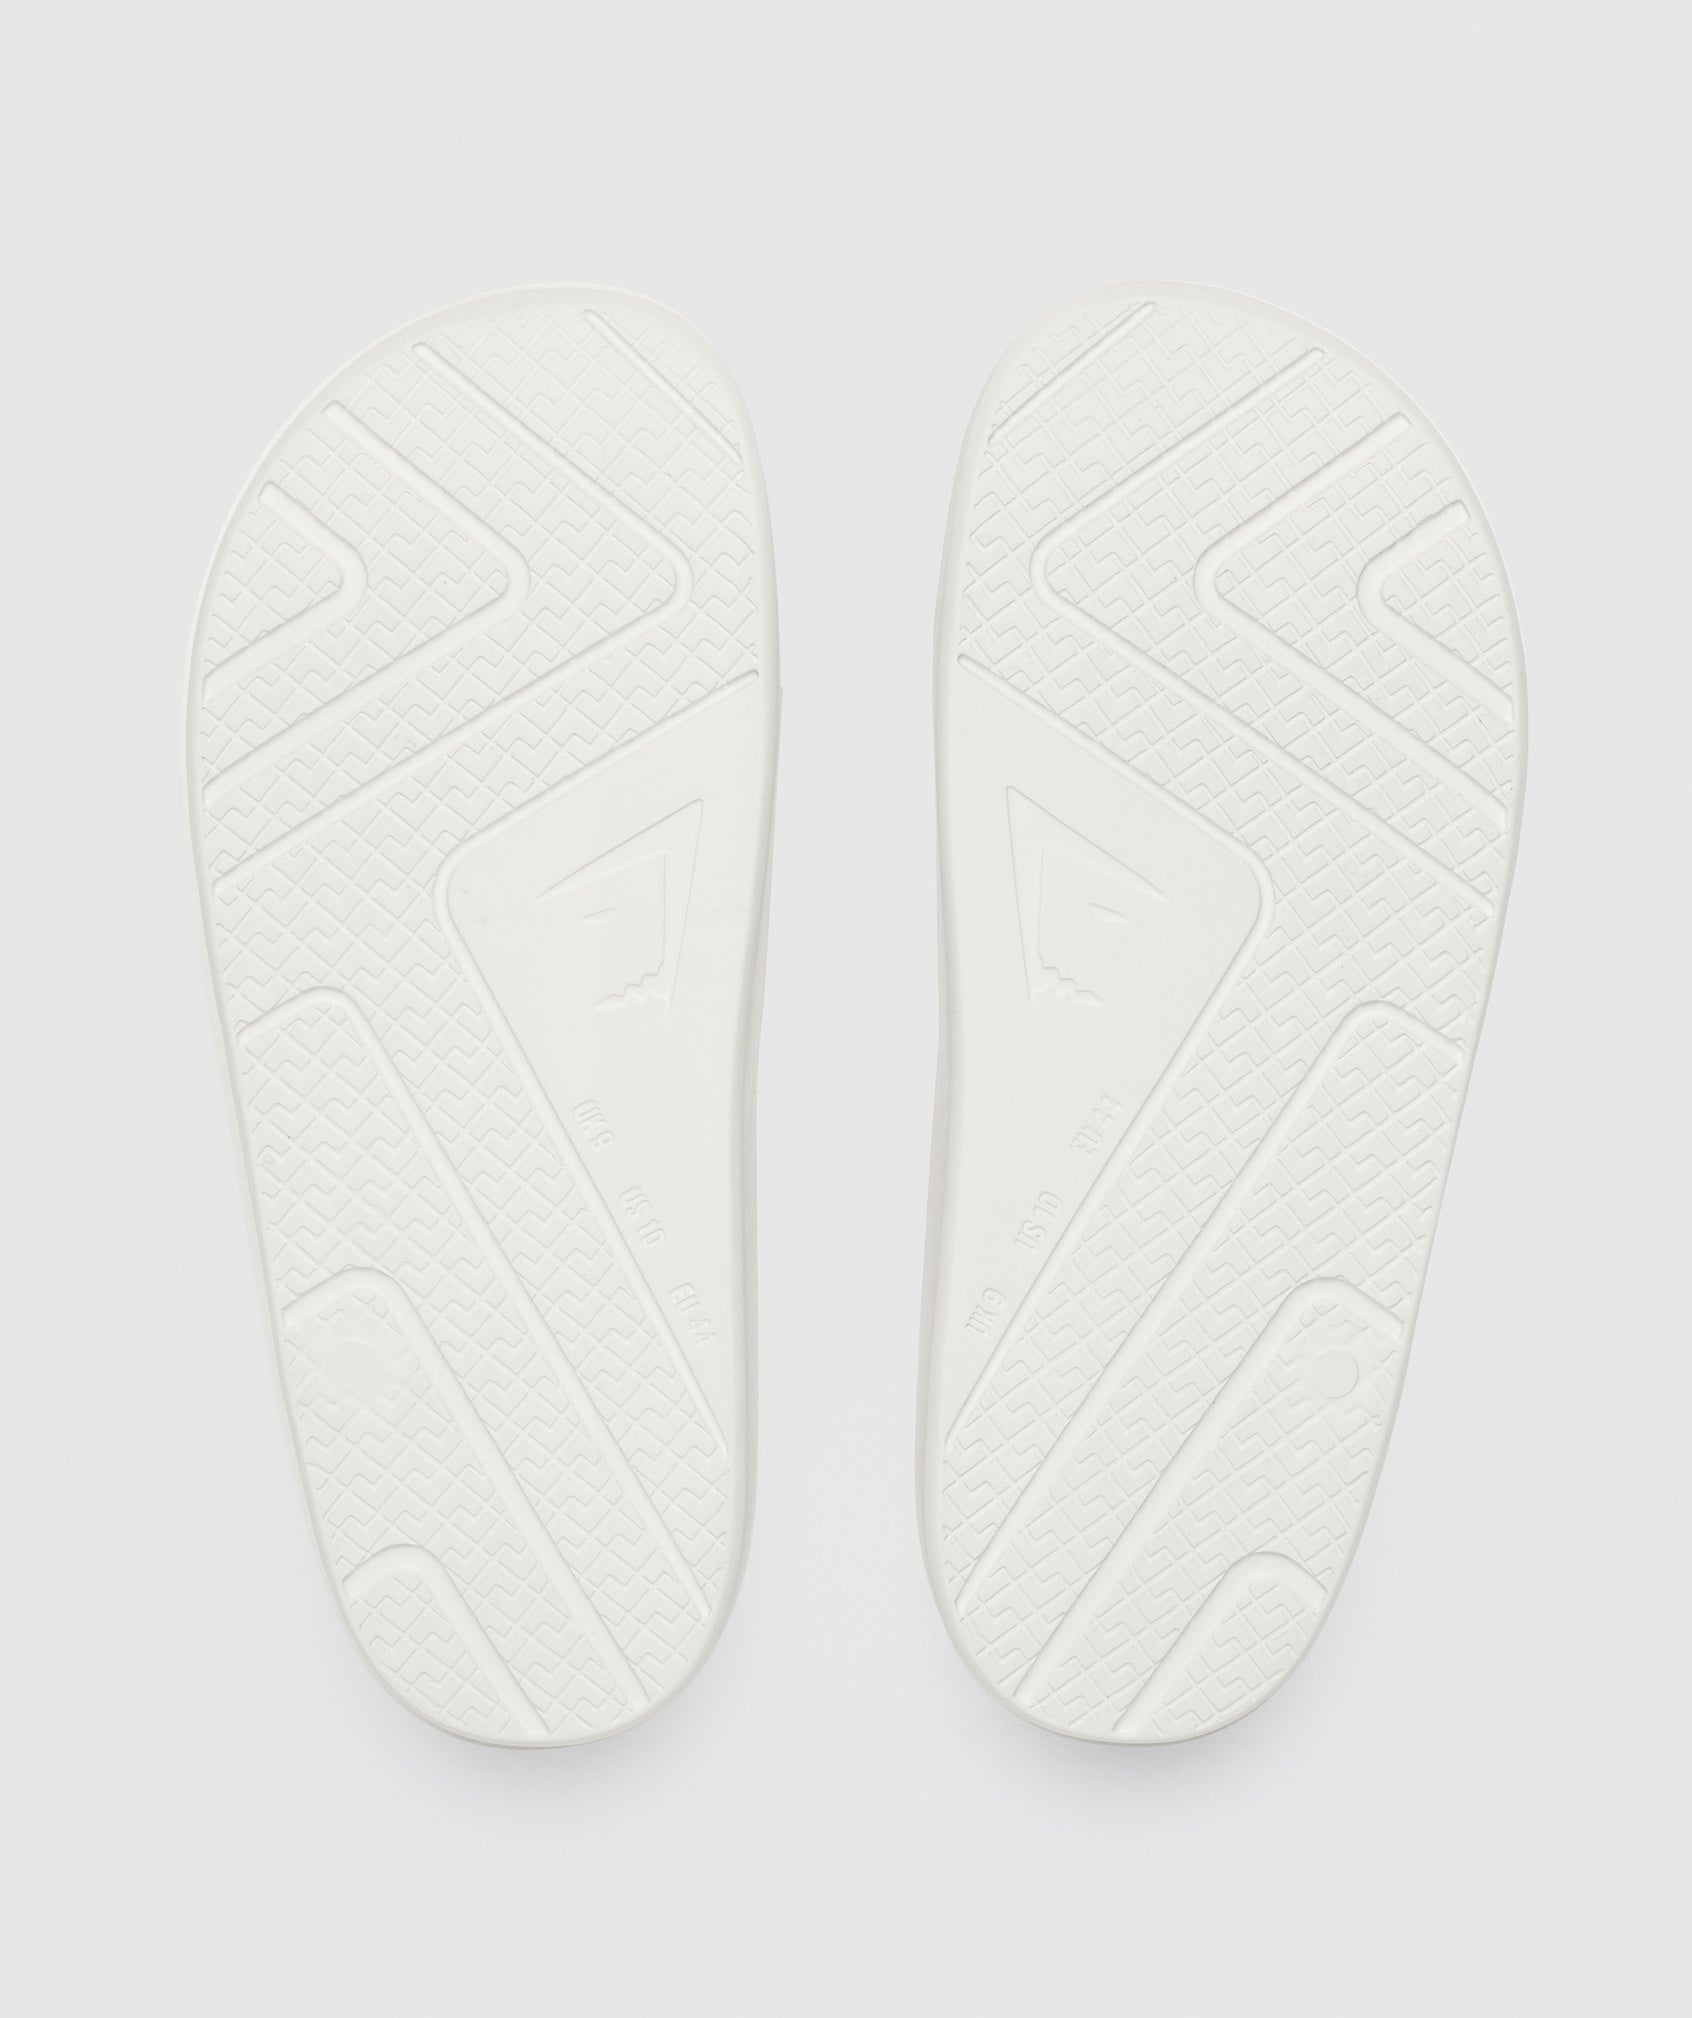 Rest Day Slides in Off White - view 6